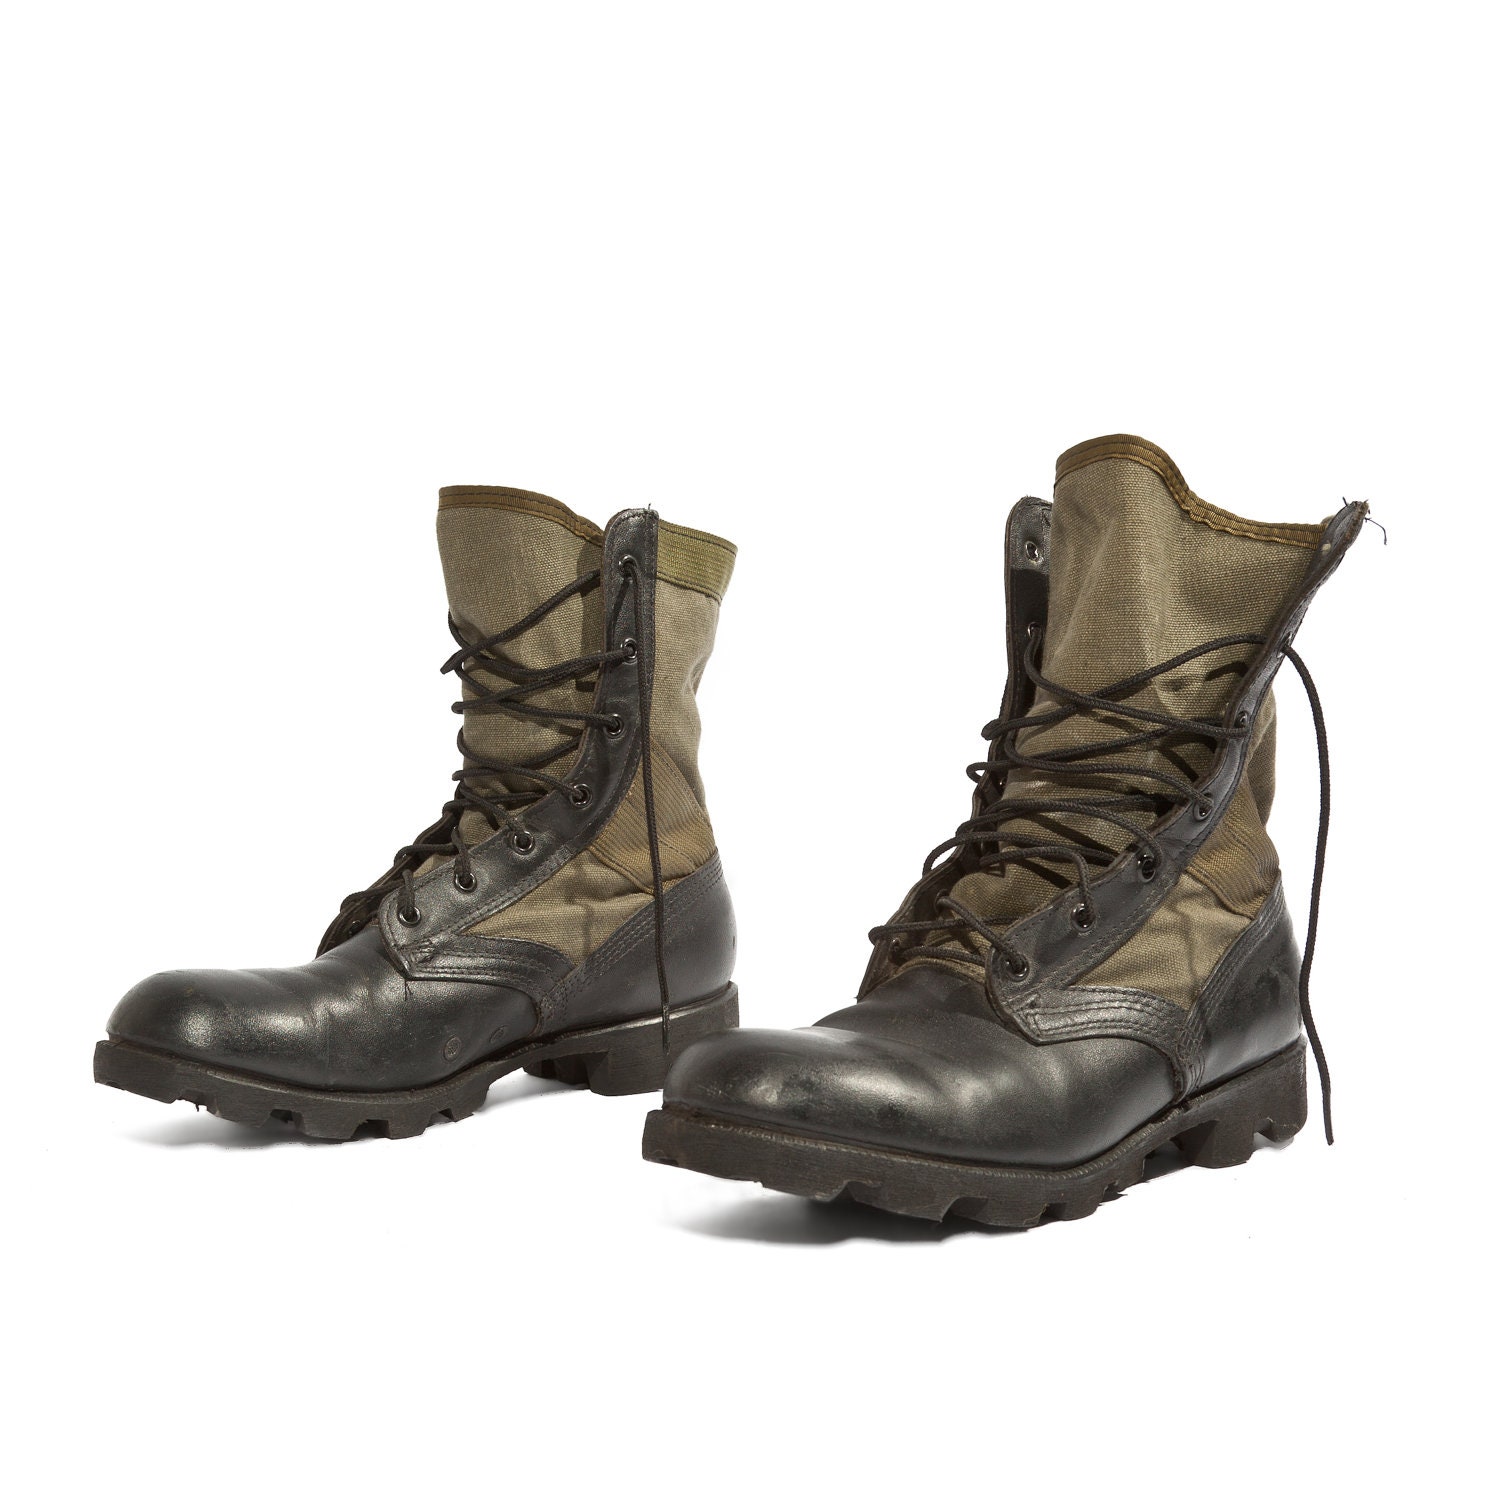 Vintage Military Jungle Boots in Black and Green for a